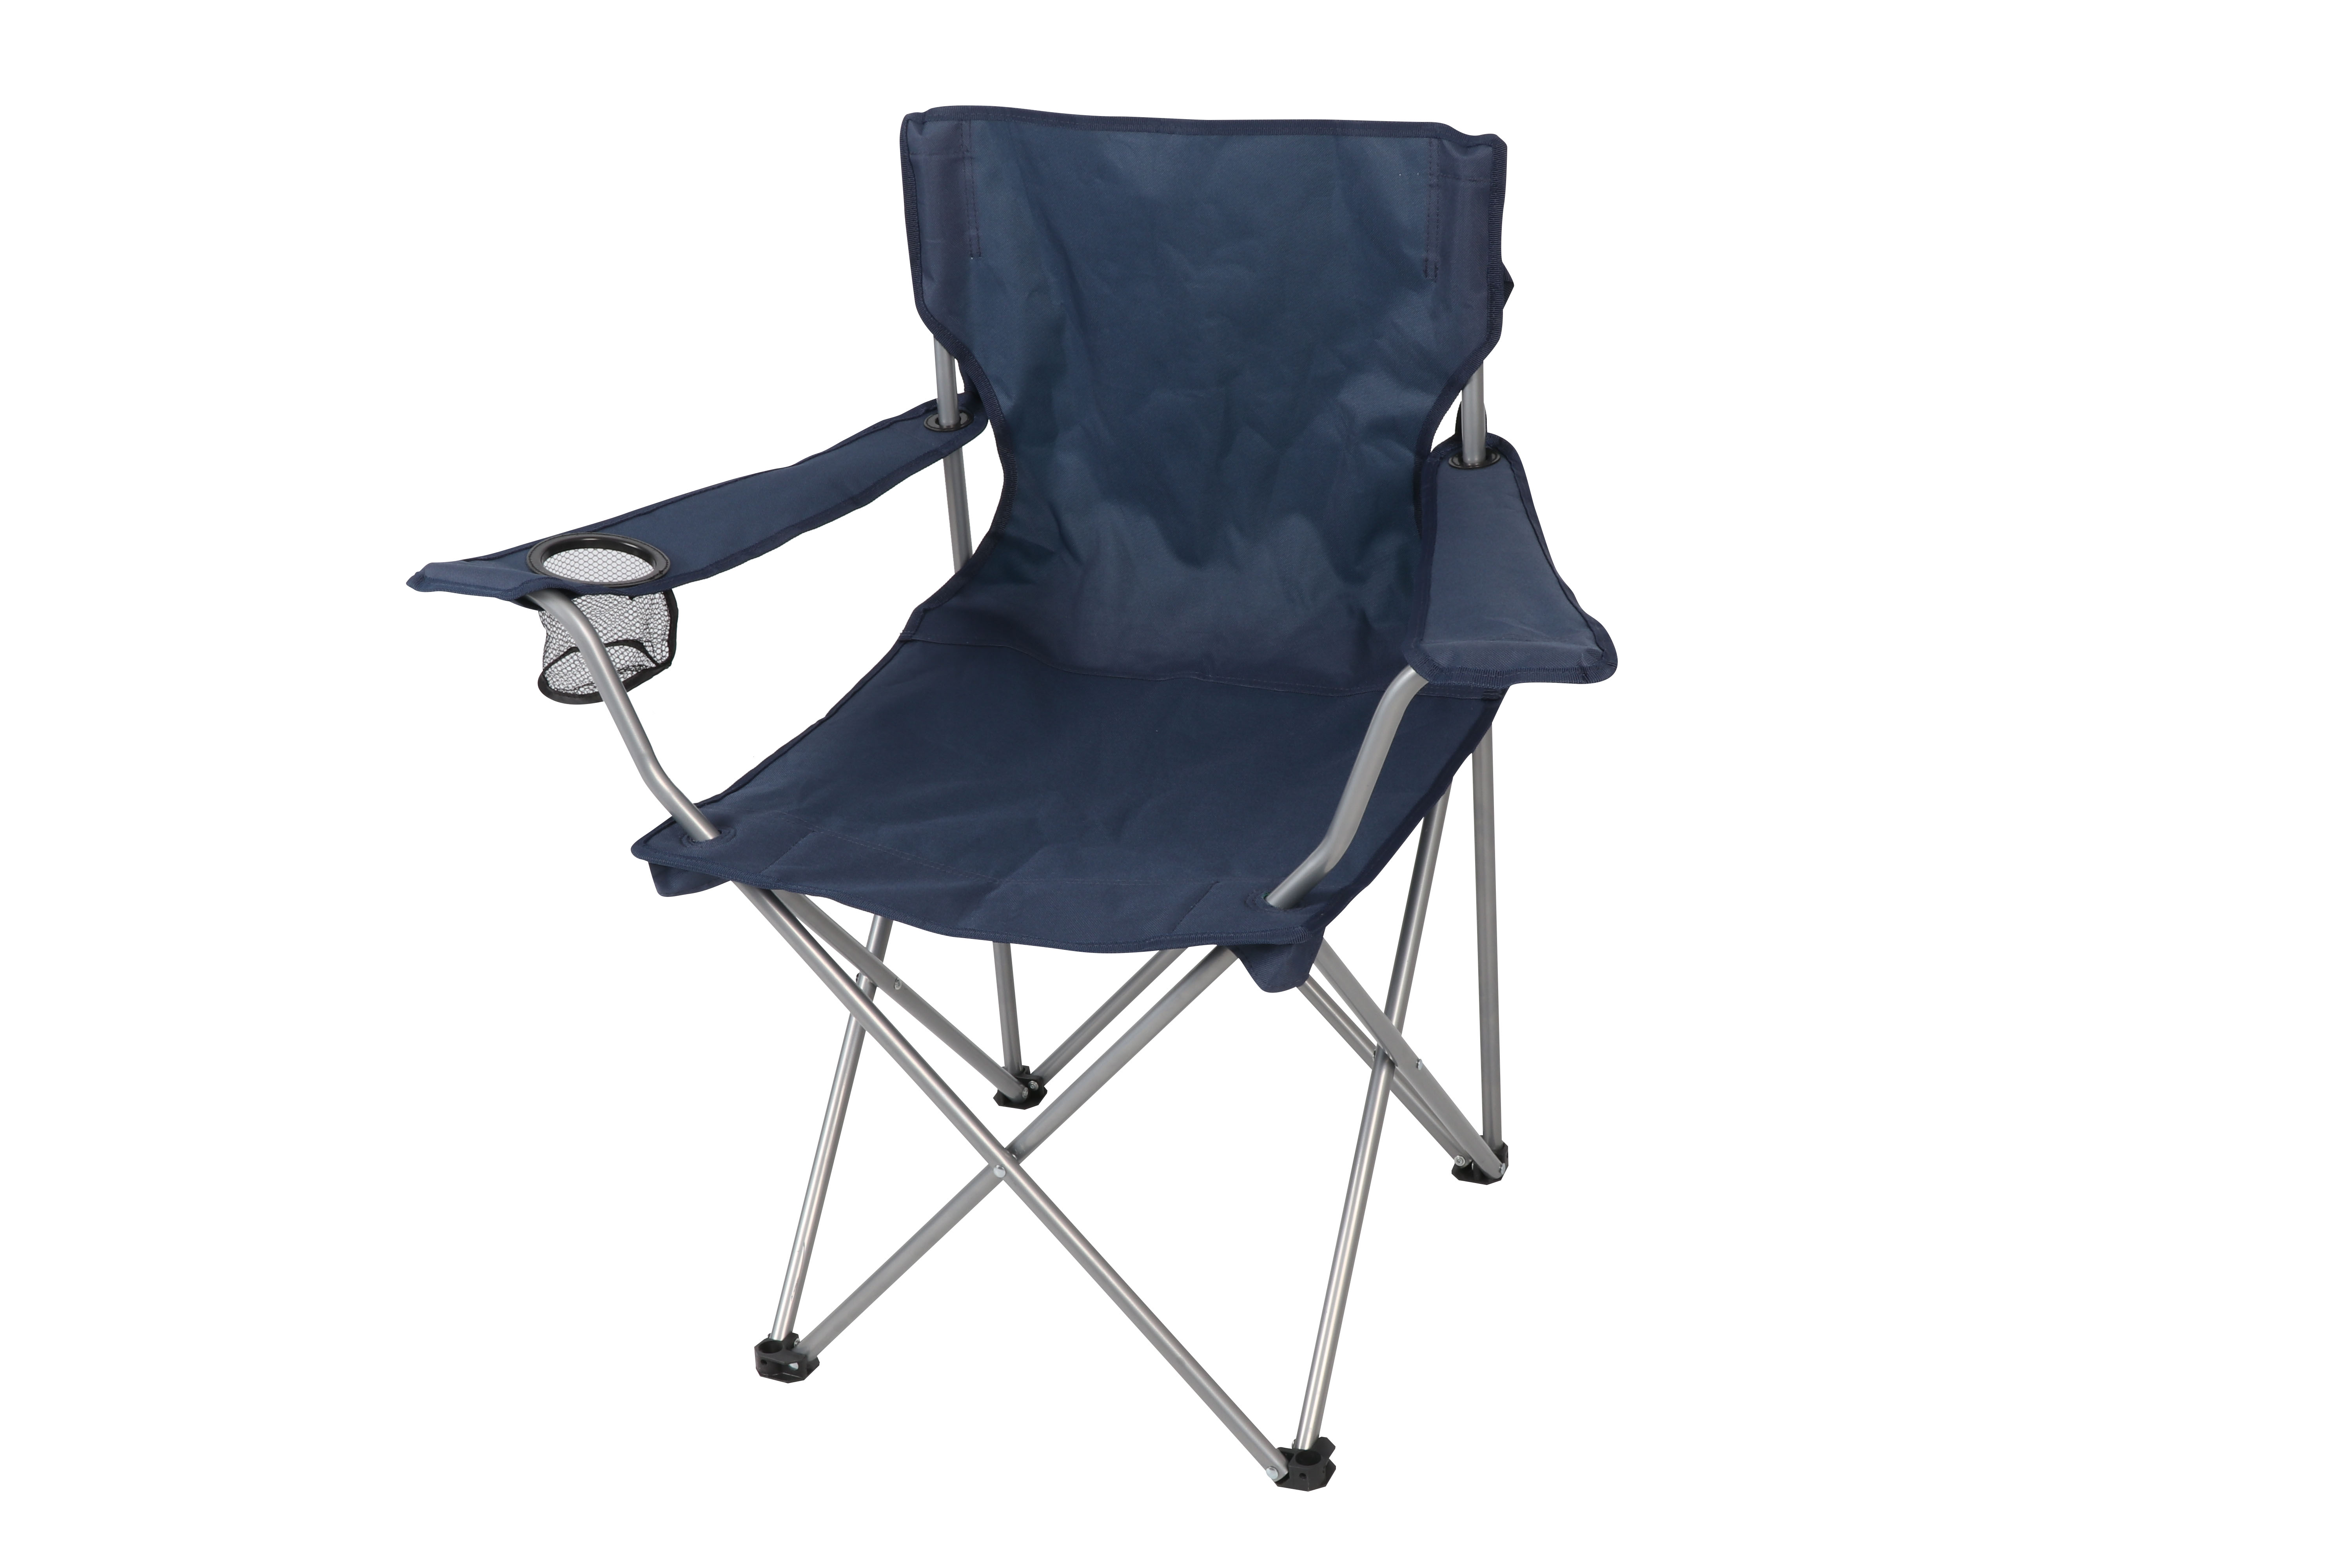 Ozark Trail Camping Chair, Blue, 4 and Half Pounds - image 1 of 13